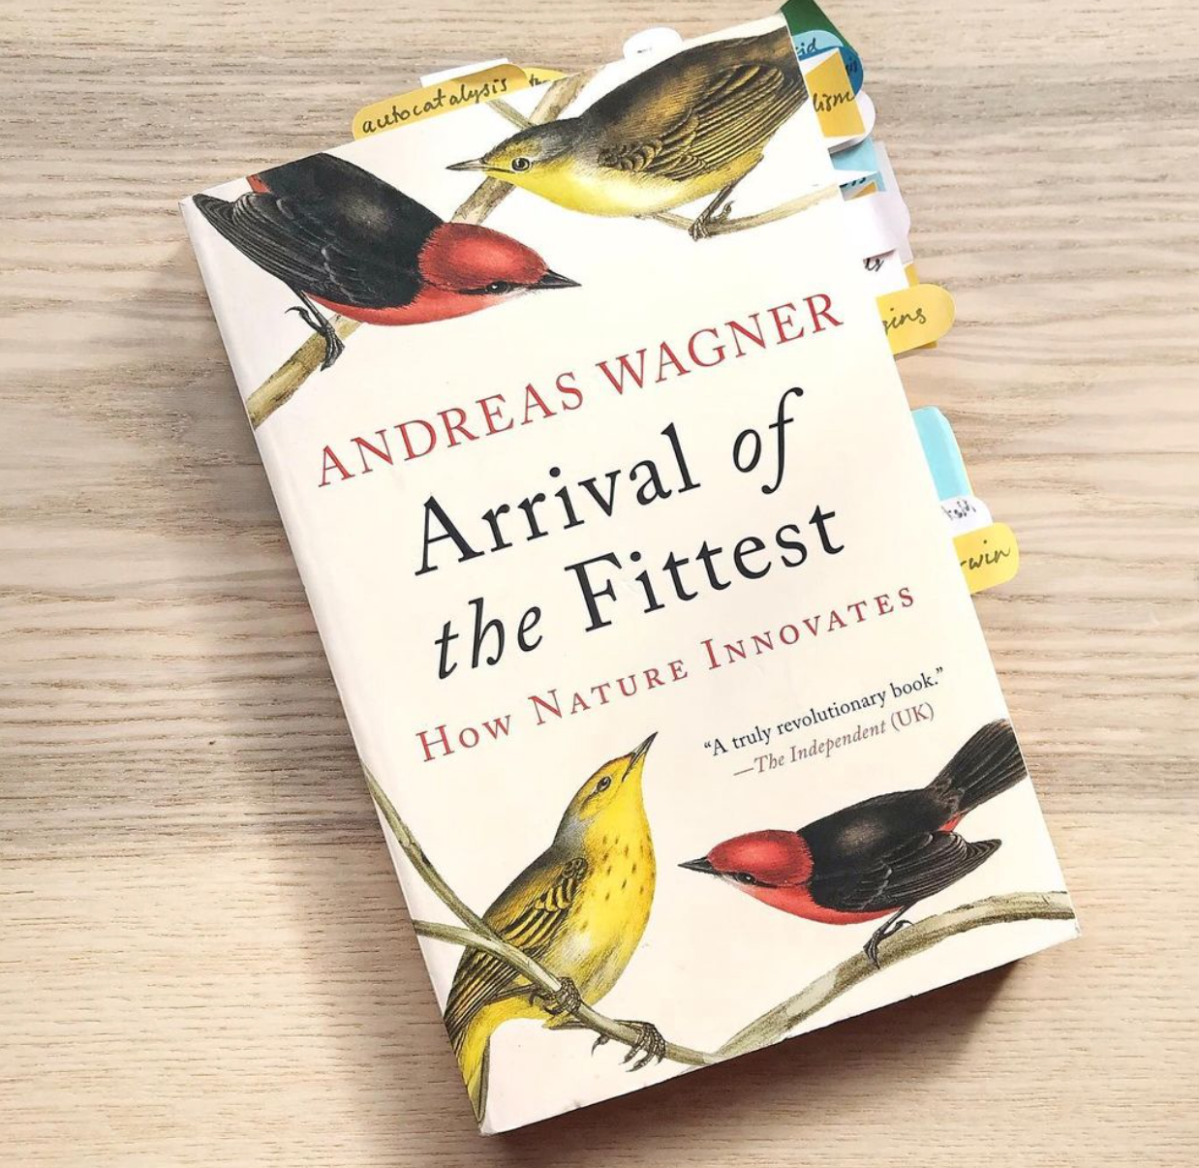 ✨MINI REVIEW✨ Arrival of the Fittest by Andreas Wagner ⁠